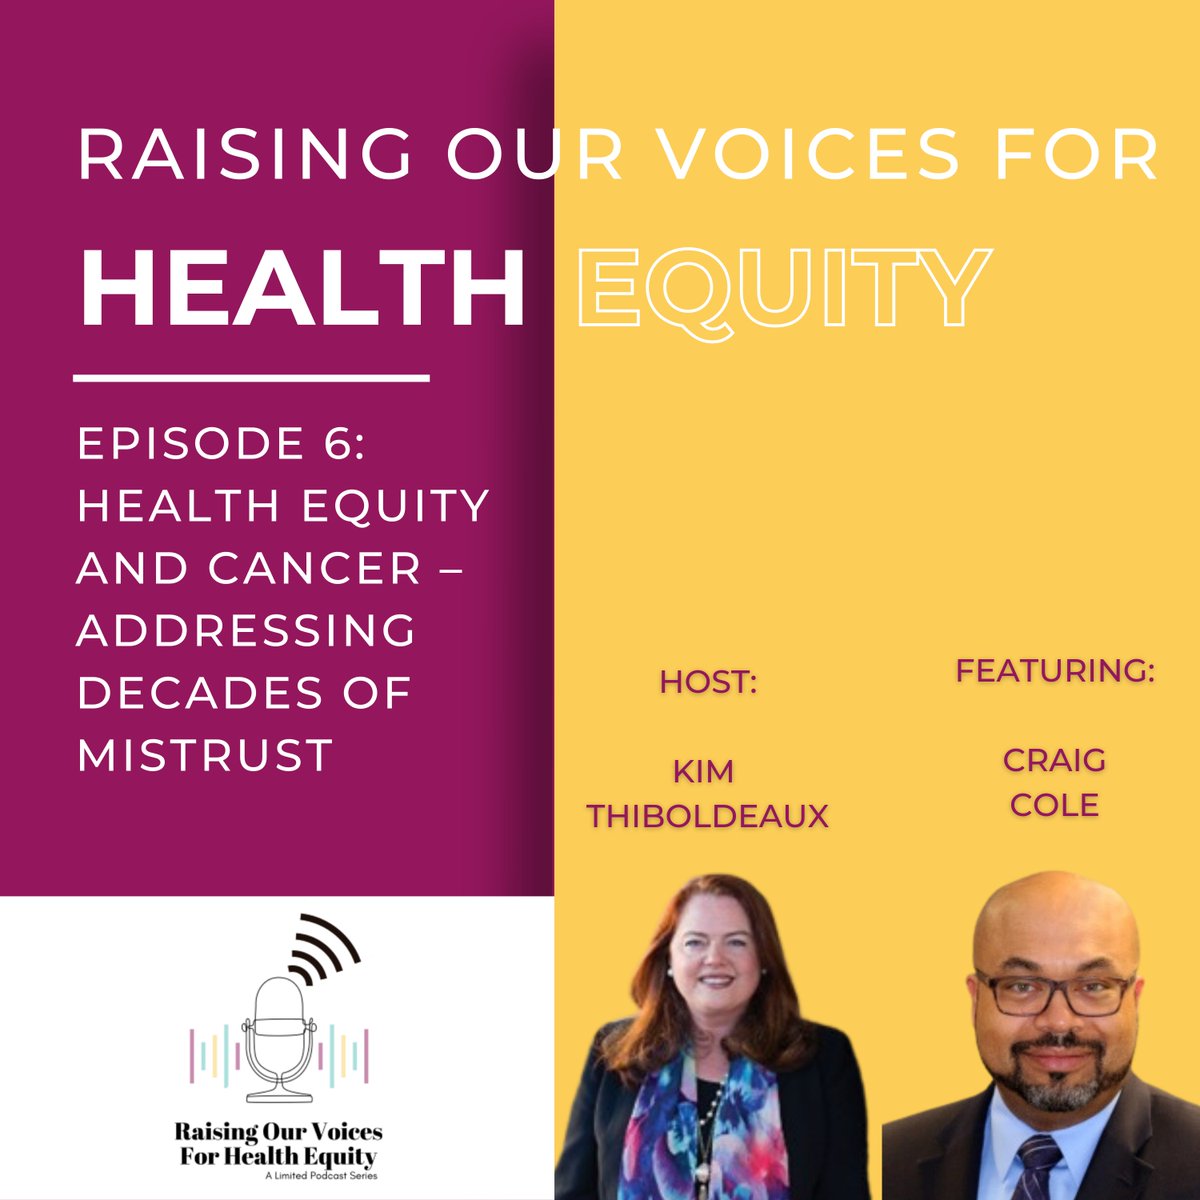 You can listen to all the episodes of 'Raising Our Voices for Health Equity' on our website (vozadvisors.com/podcast/raisin…), Spotify, or Apple Podcasts.